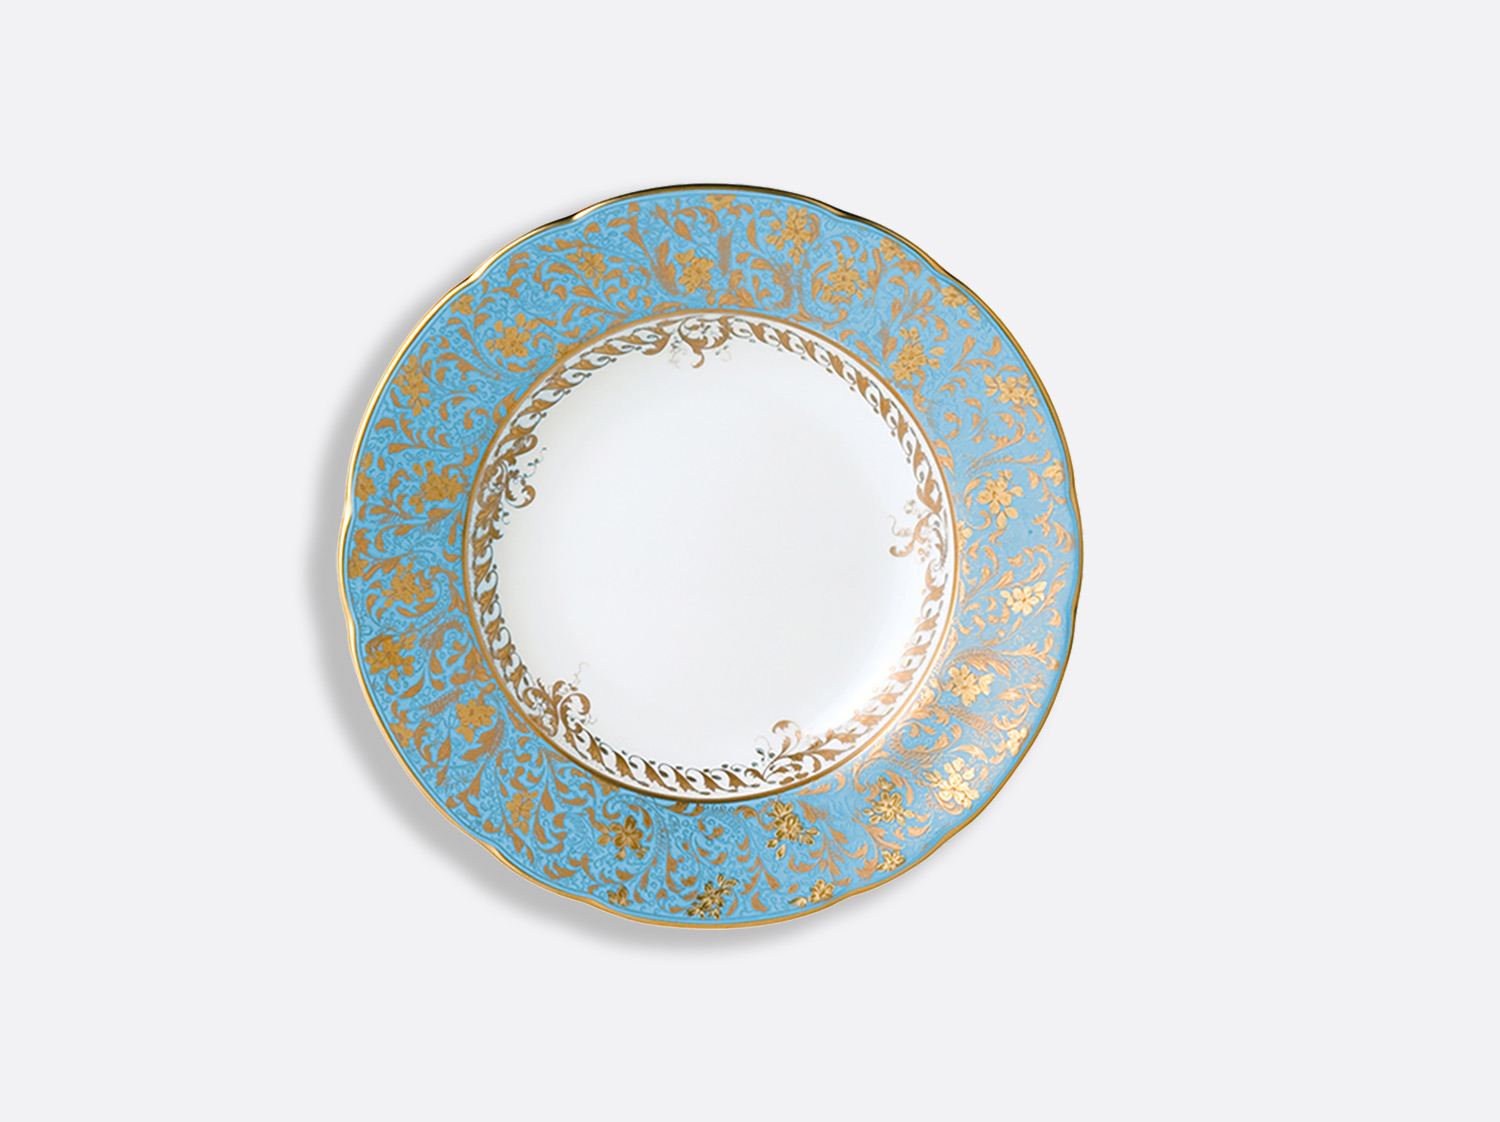 China Rim soup 22,5 cm of the collection Eden turquoise | Bernardaud